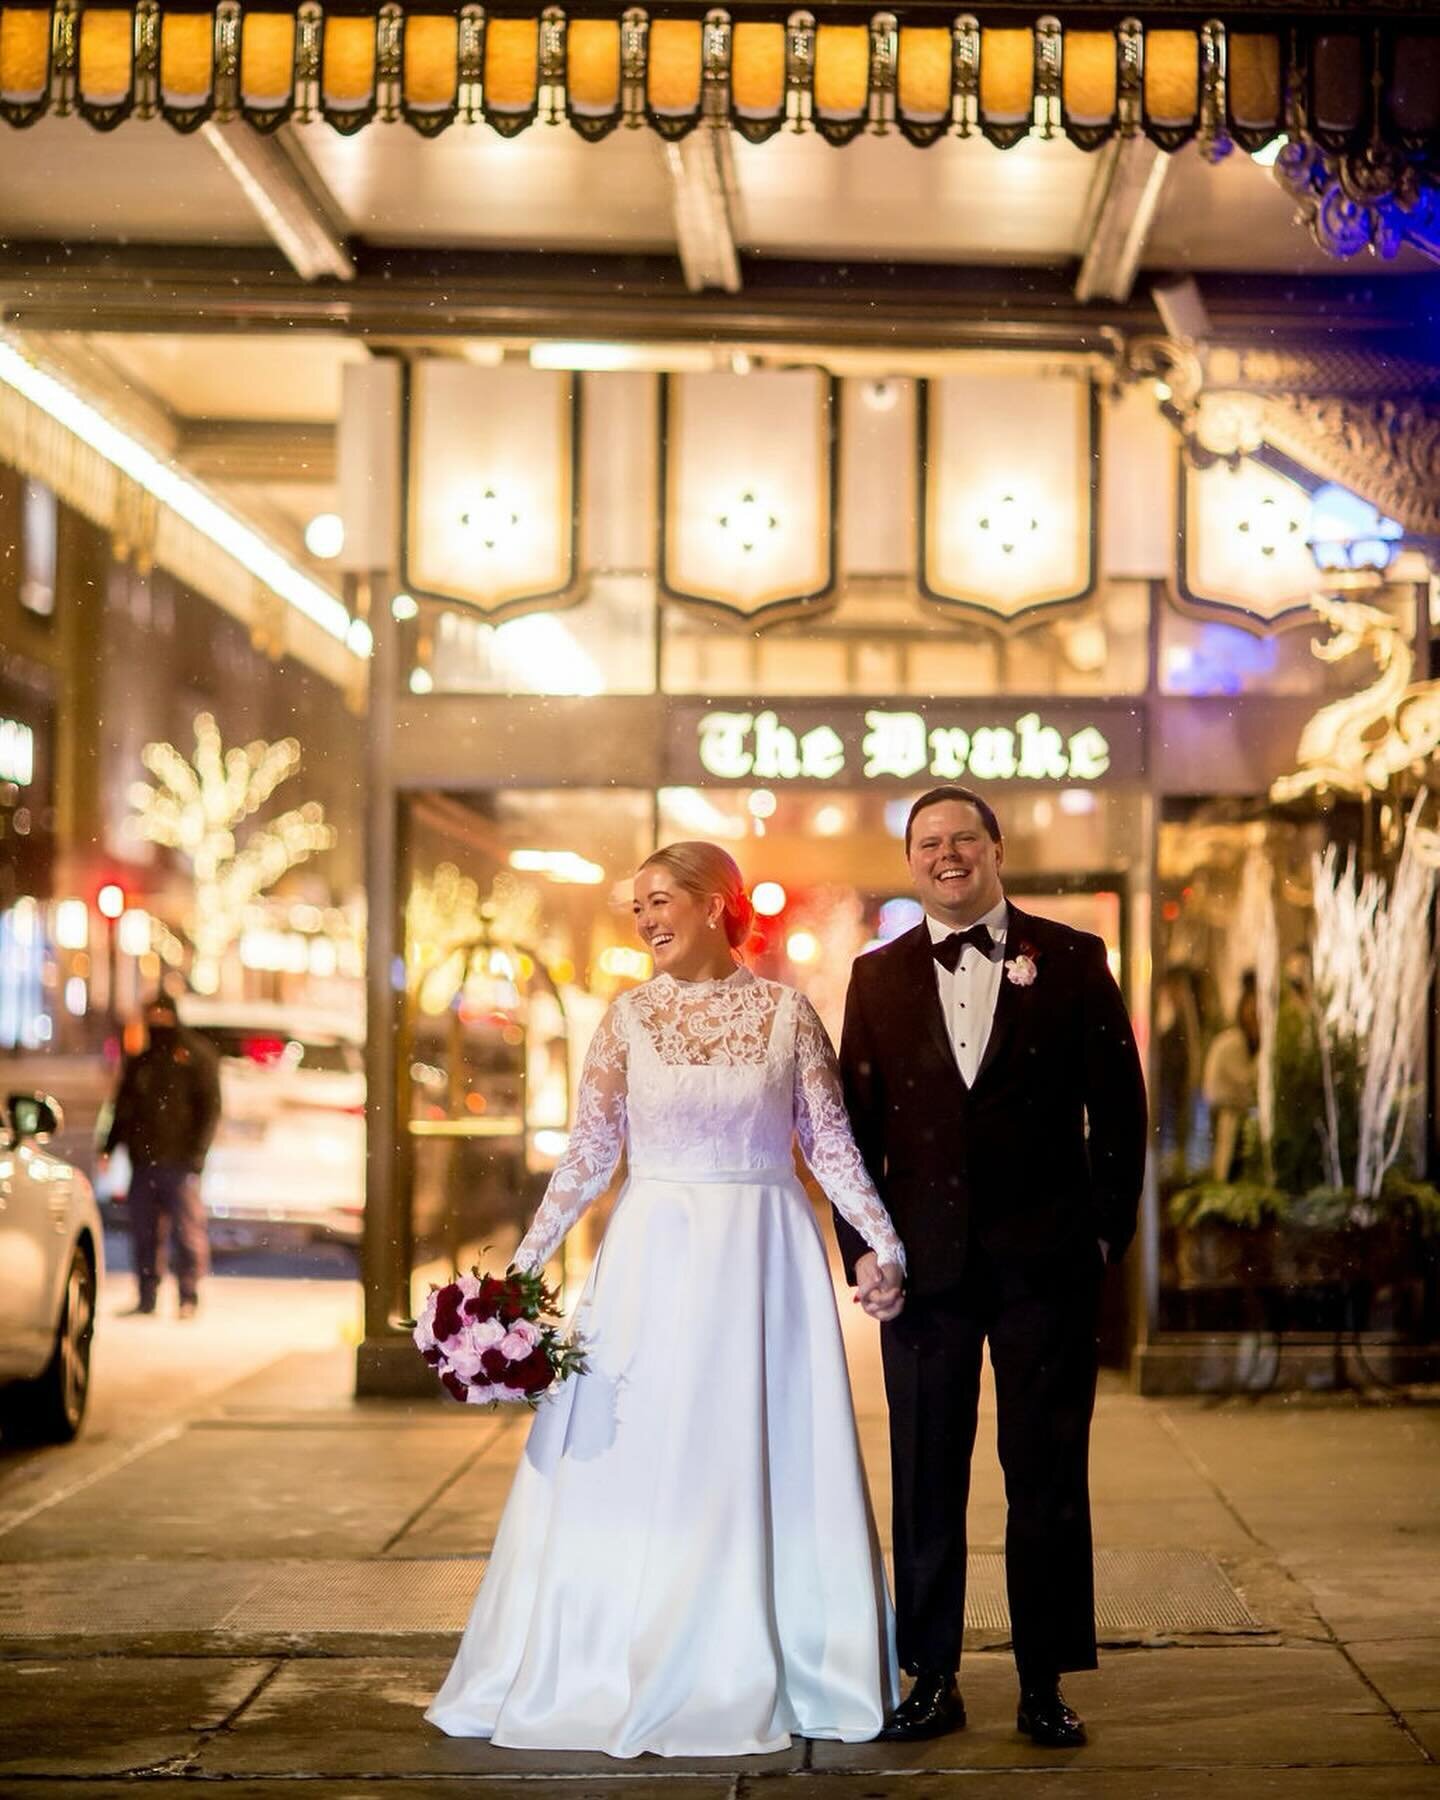 Shannon &amp; Jack&rsquo;s wedding at @thedrakechicago was nothing less than perfect.  It was memorable, sweet, and breathtakingly beautiful. January is definitely not considered &ldquo;wedding season&rdquo;, but give me all the January weddings. In 